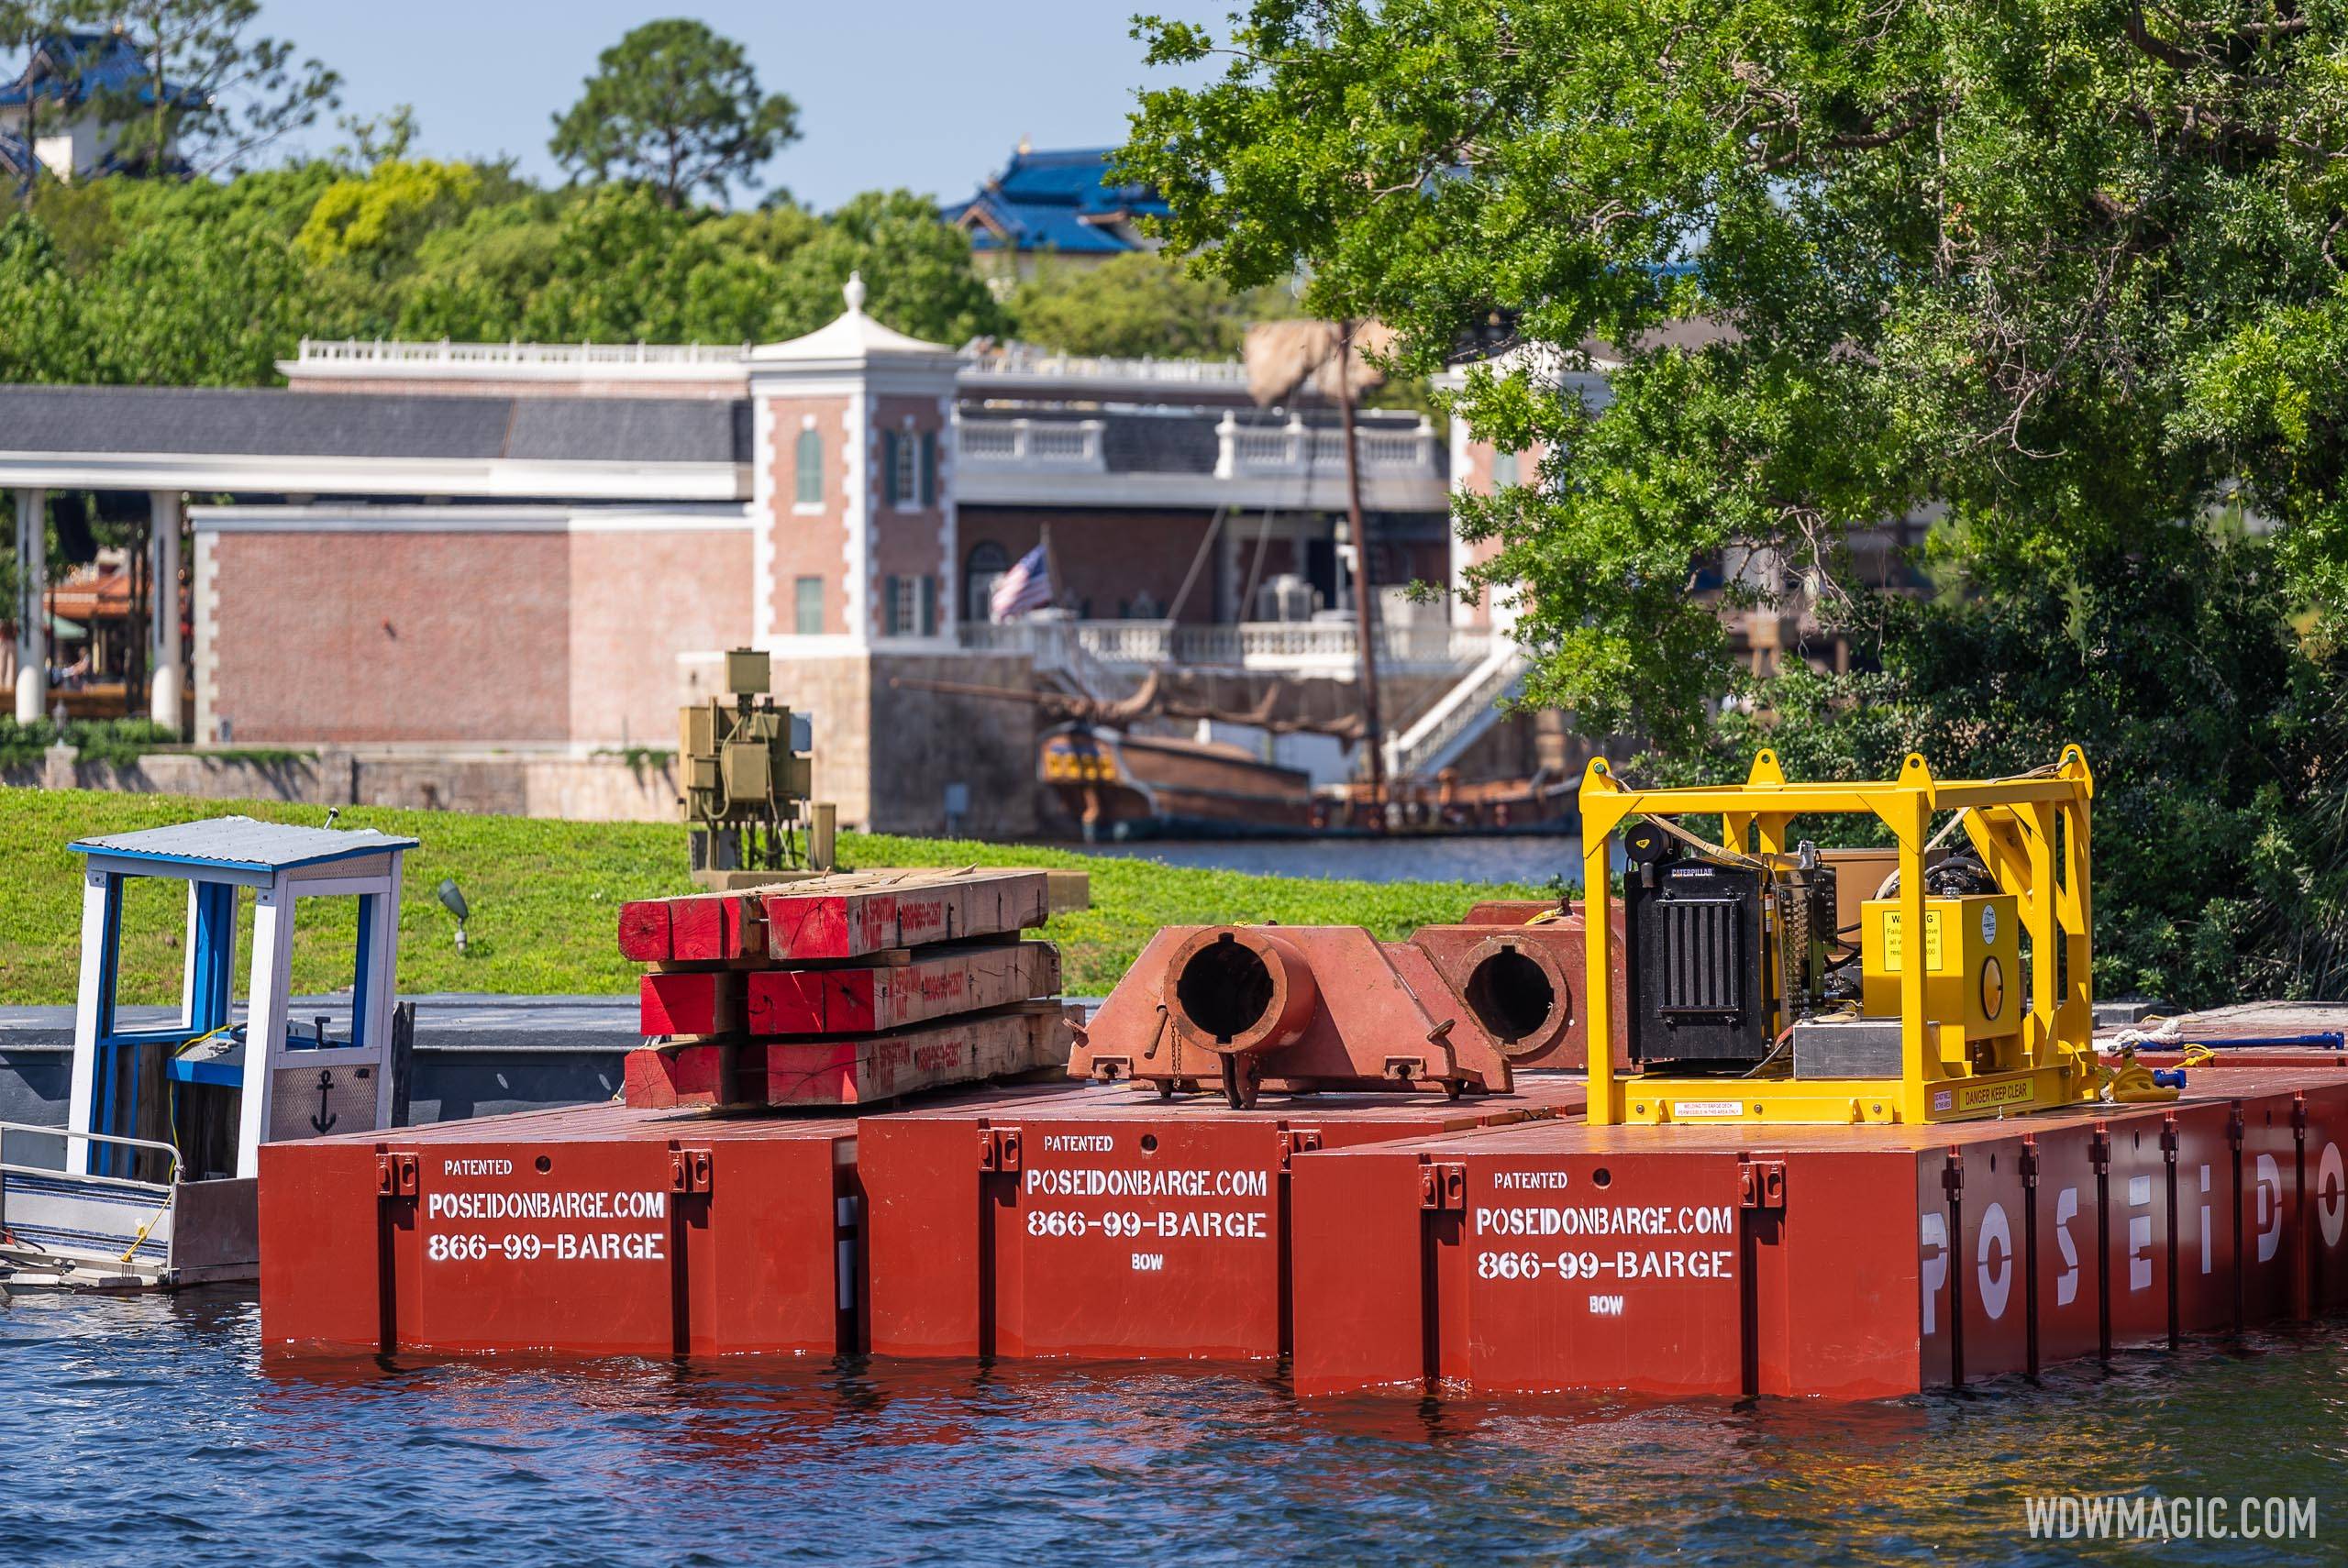 Equipment is being staged in the lagoon to prepare for the new EPCOT nighttime show later in 2023